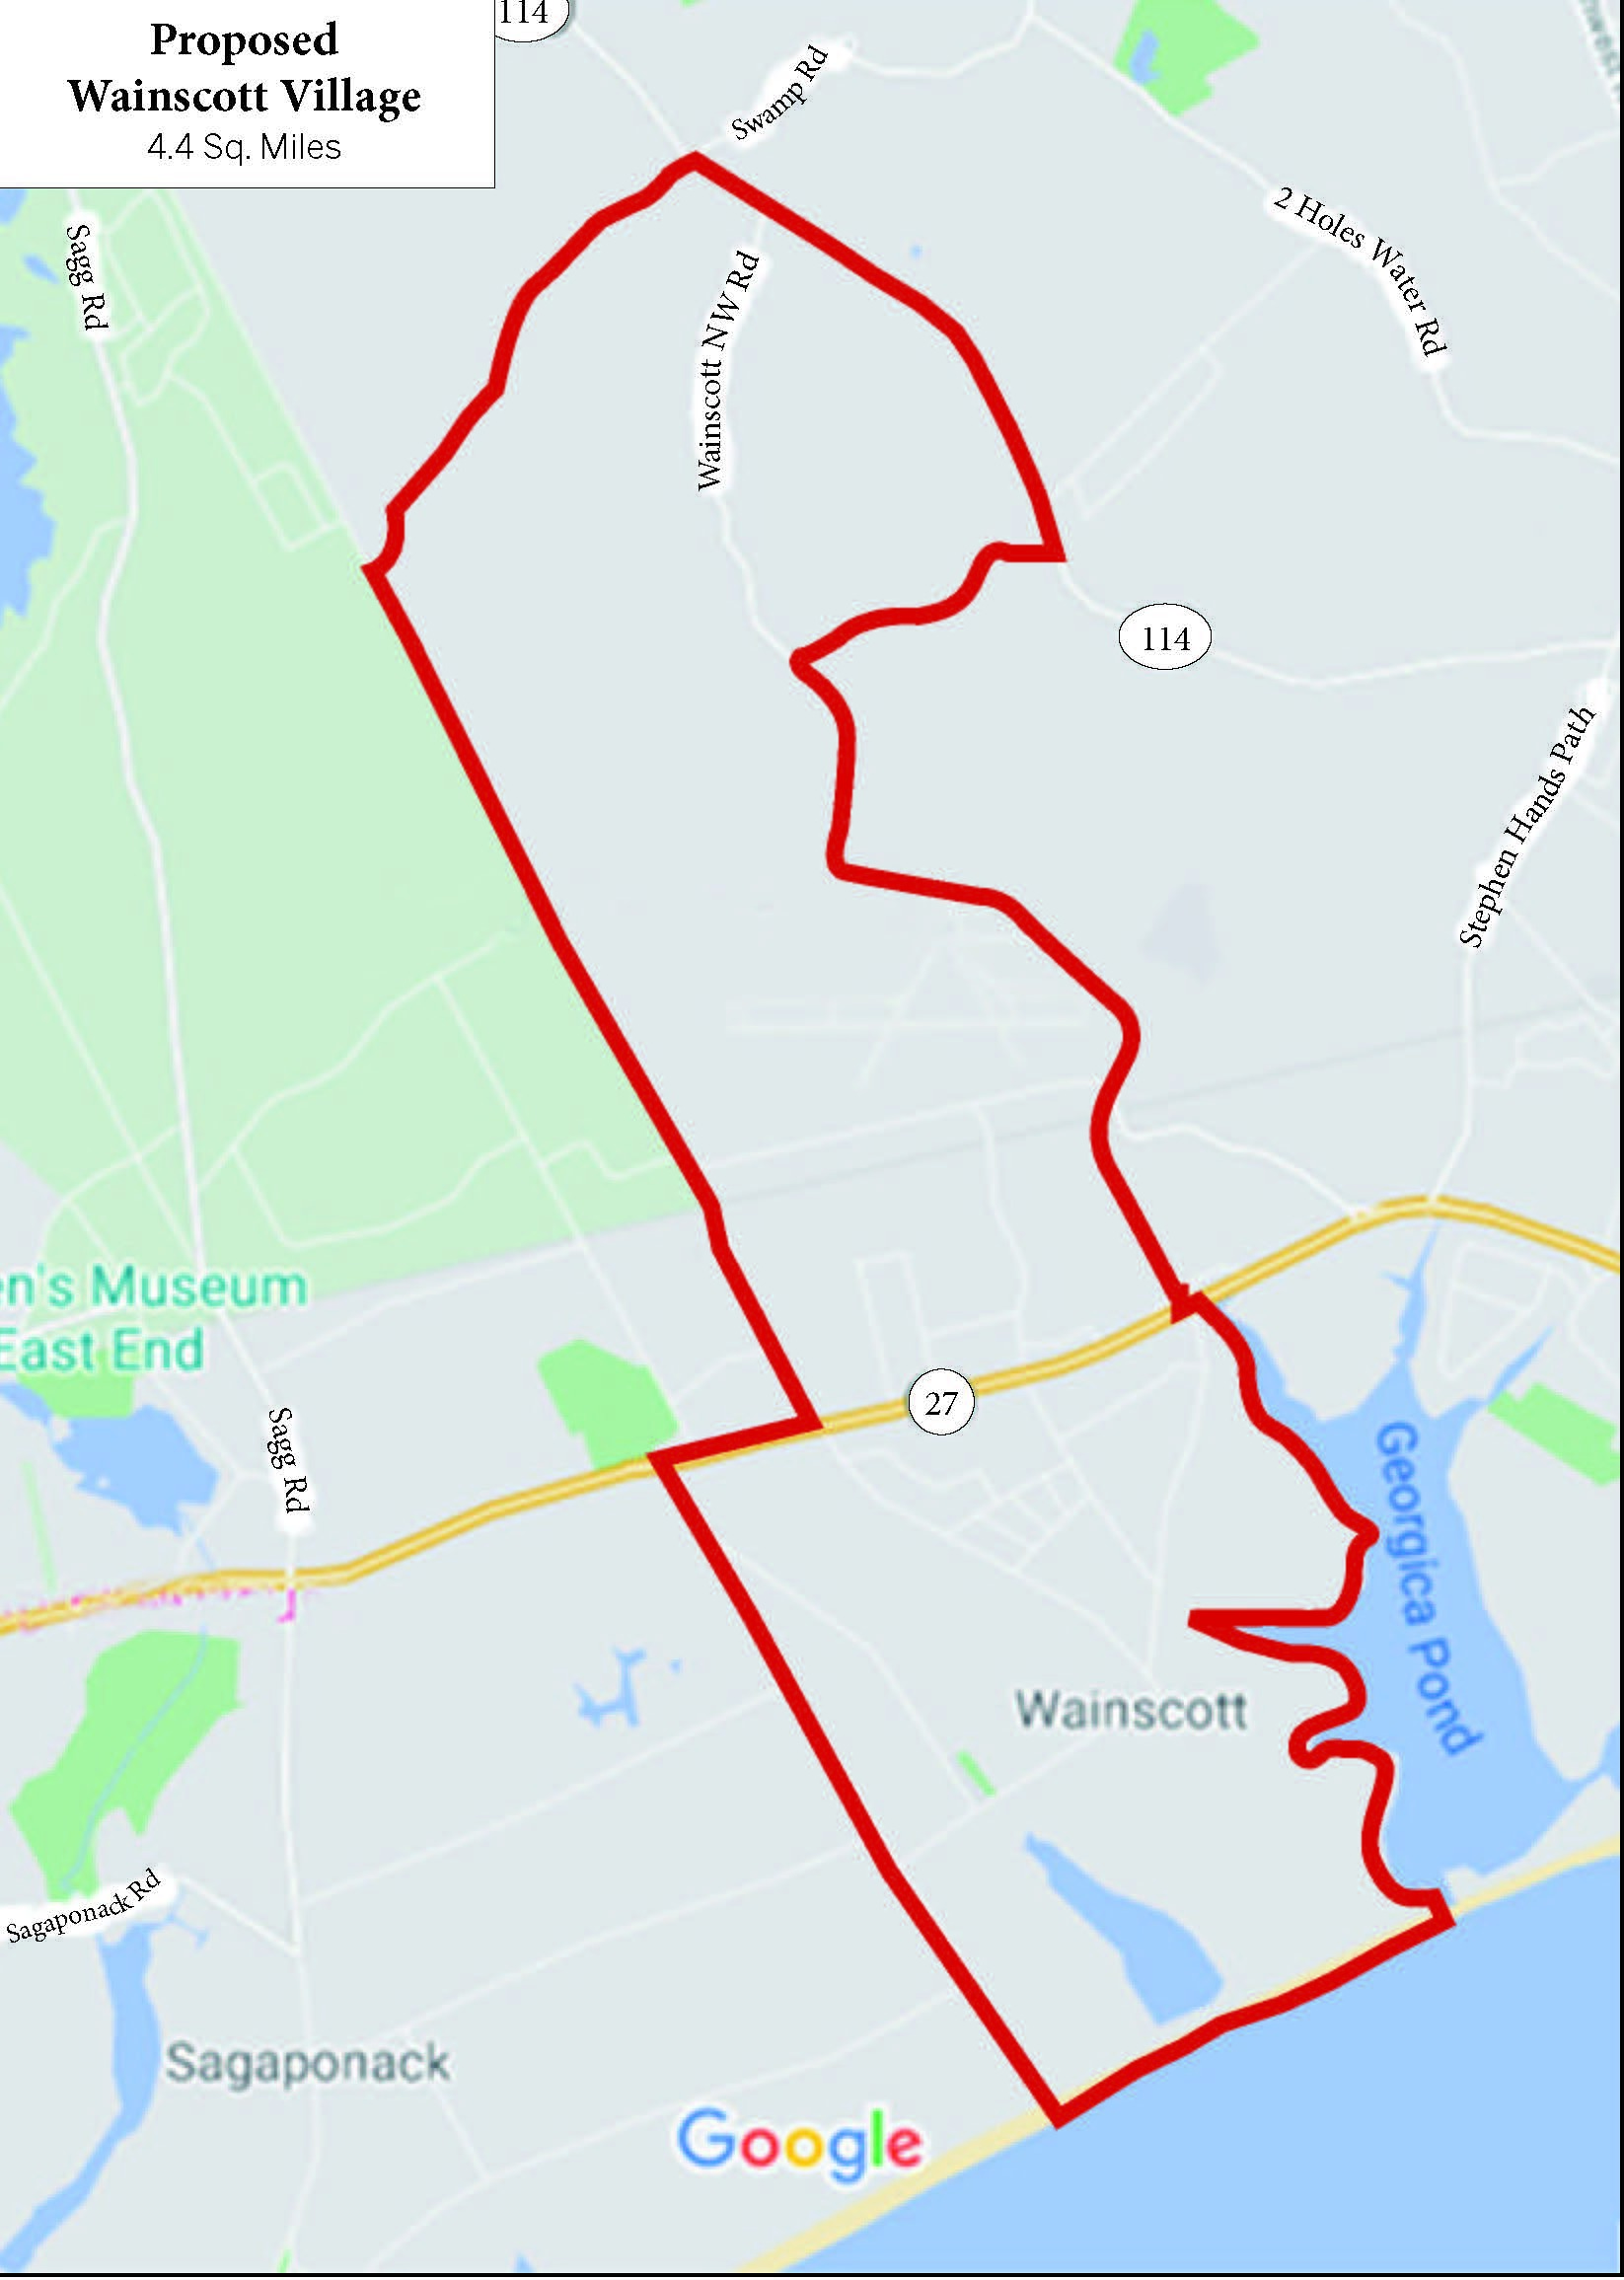 The new proposed boundaries for an incorporated villlage of Wainscott total just 4.4 miles and have cut more than two square miles of the current hamlet's eastern reaches in order to comply with state requirements for incorporation.